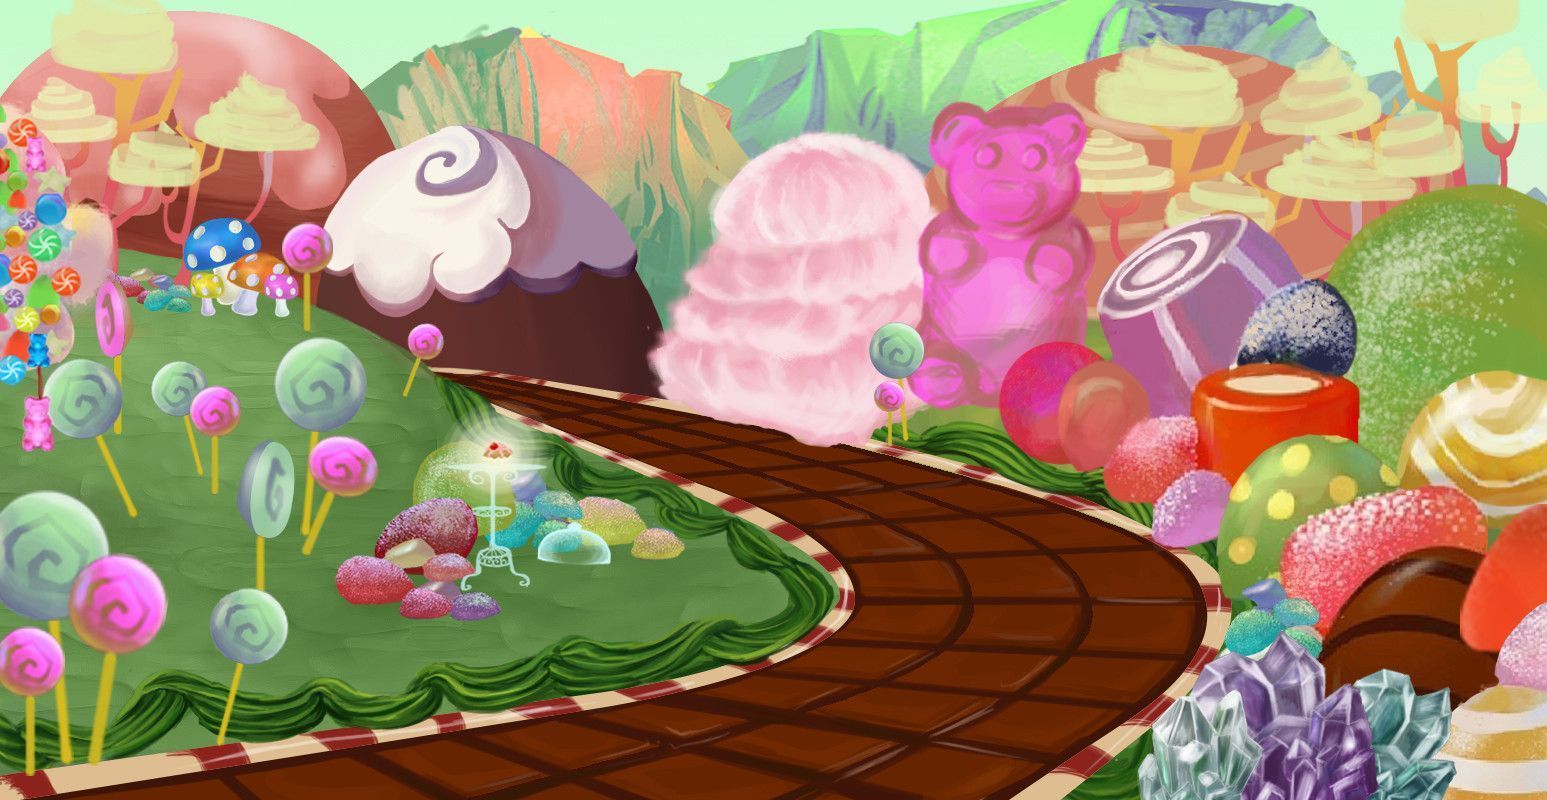 Candyland clipart background. Pix for board places